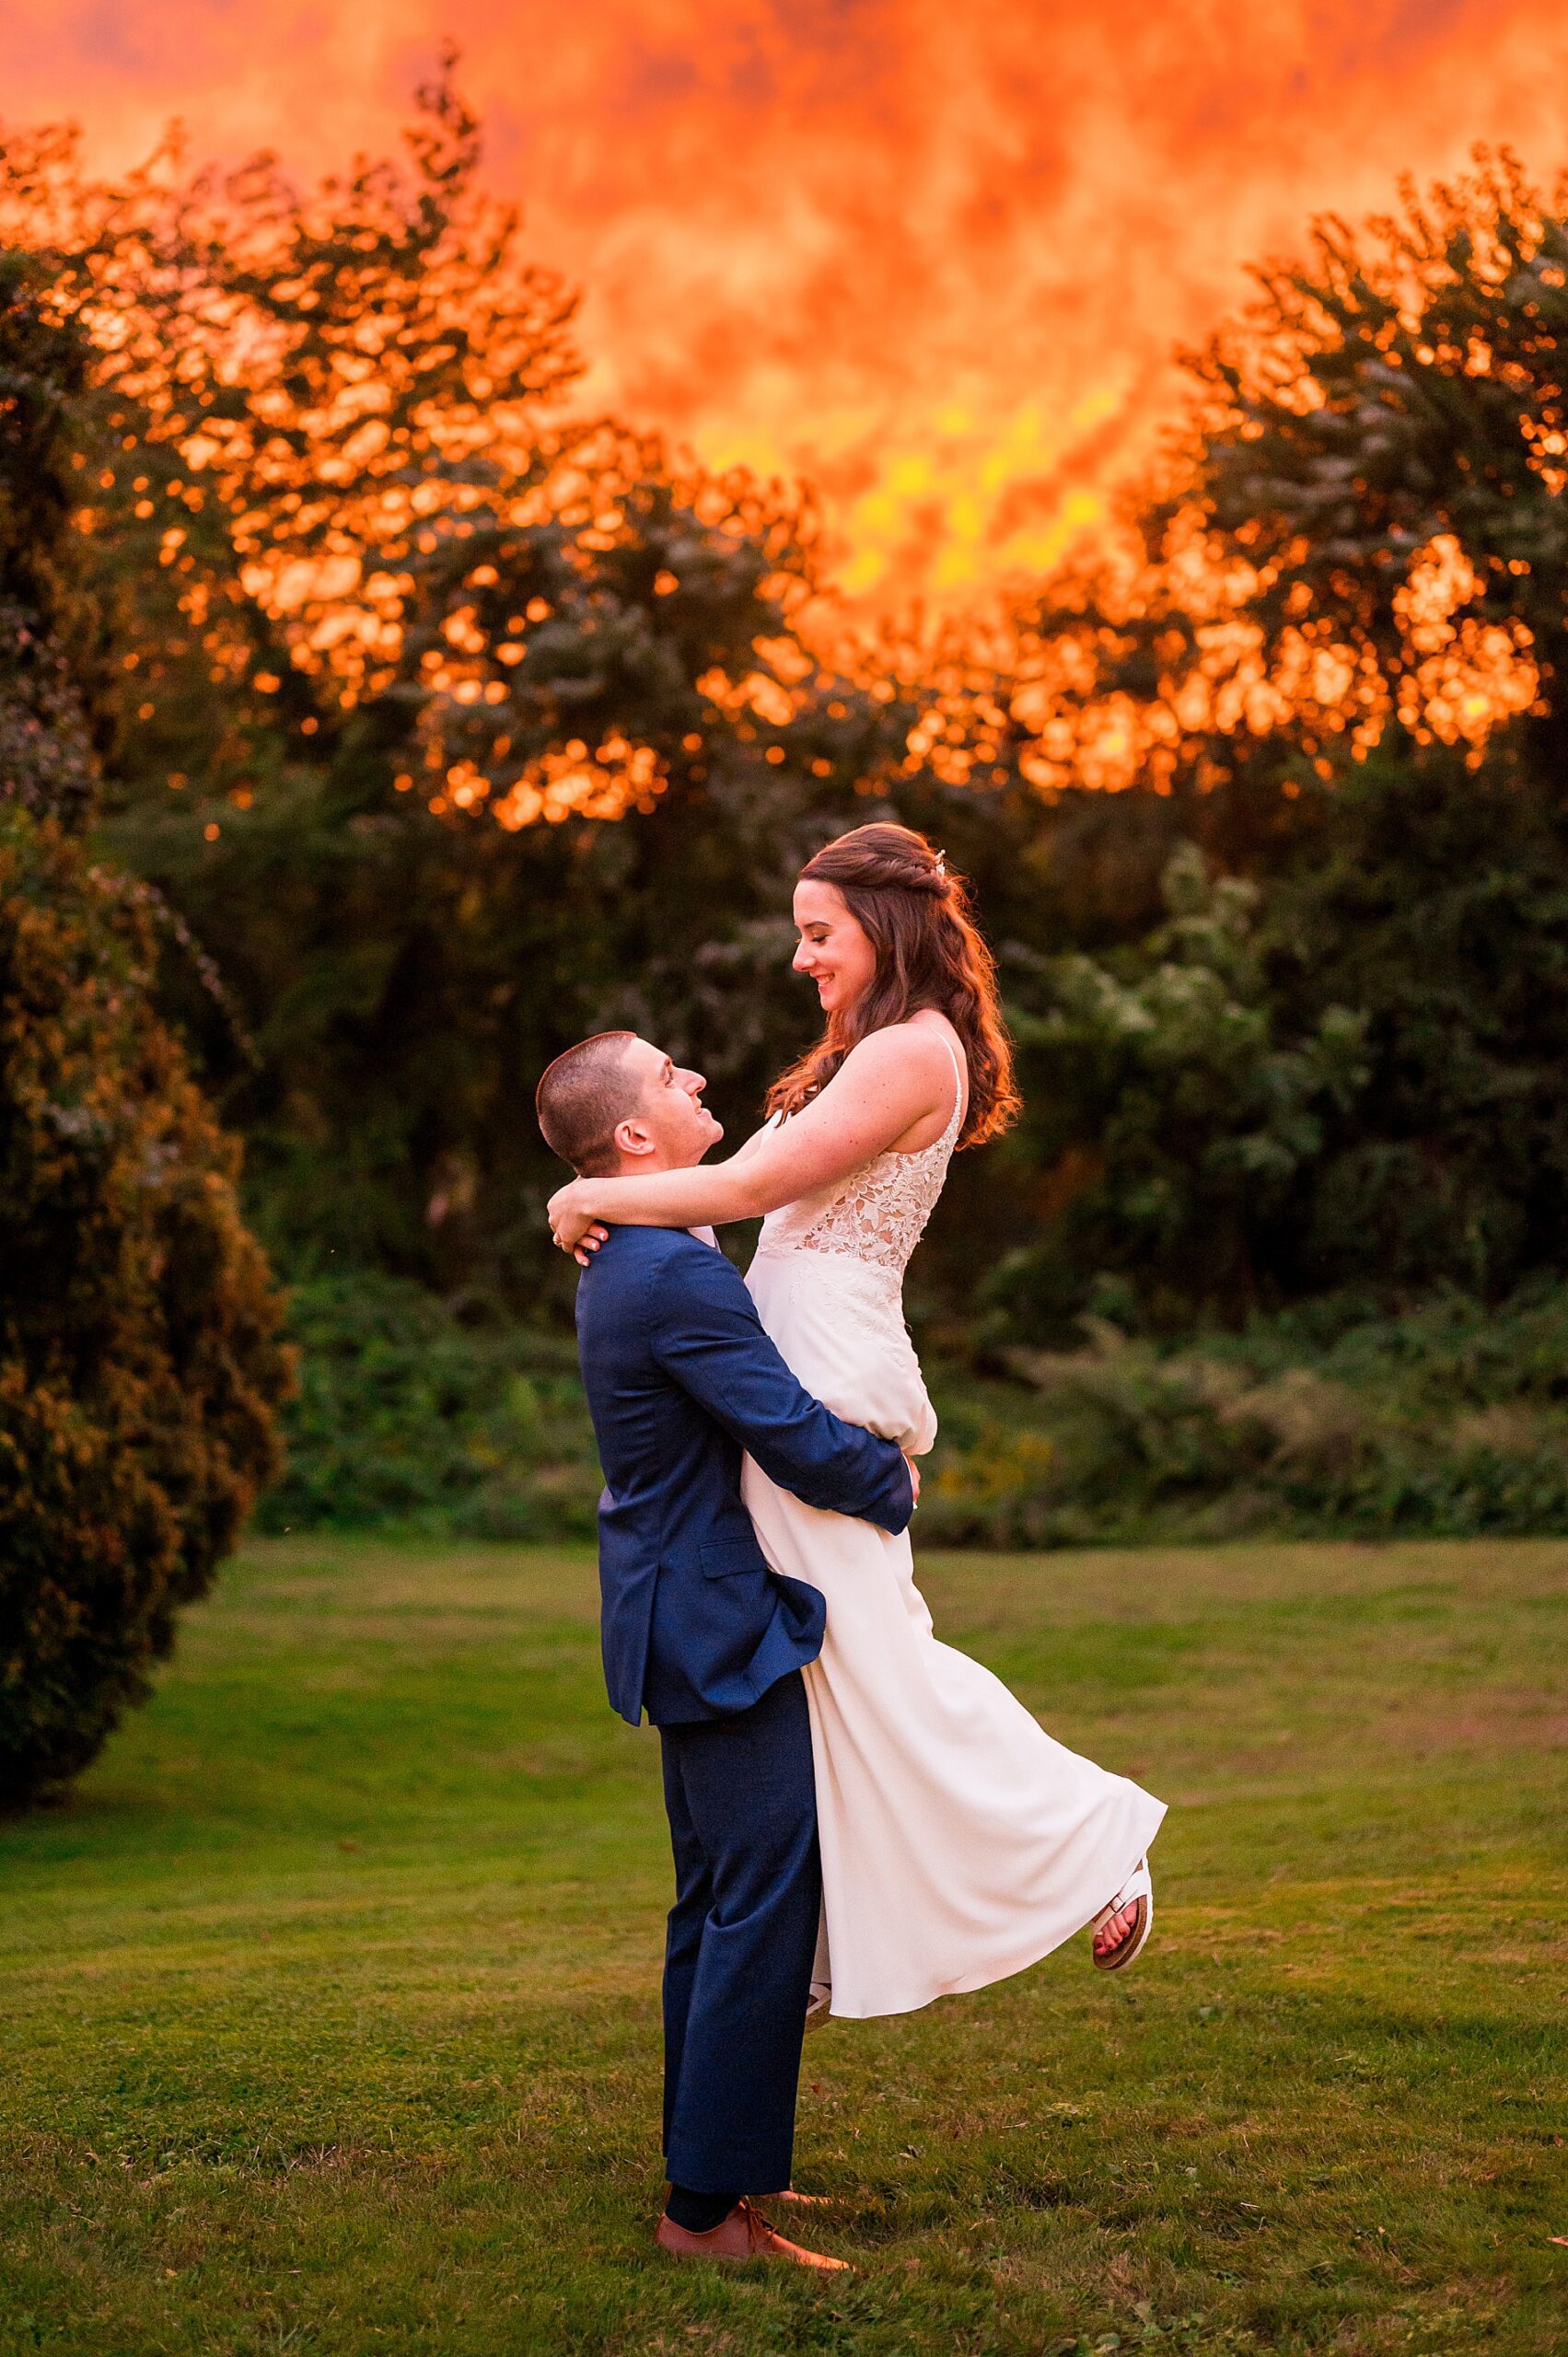 romantic sunset wedding portaits from North Shore wedding  at The Hellenic Center